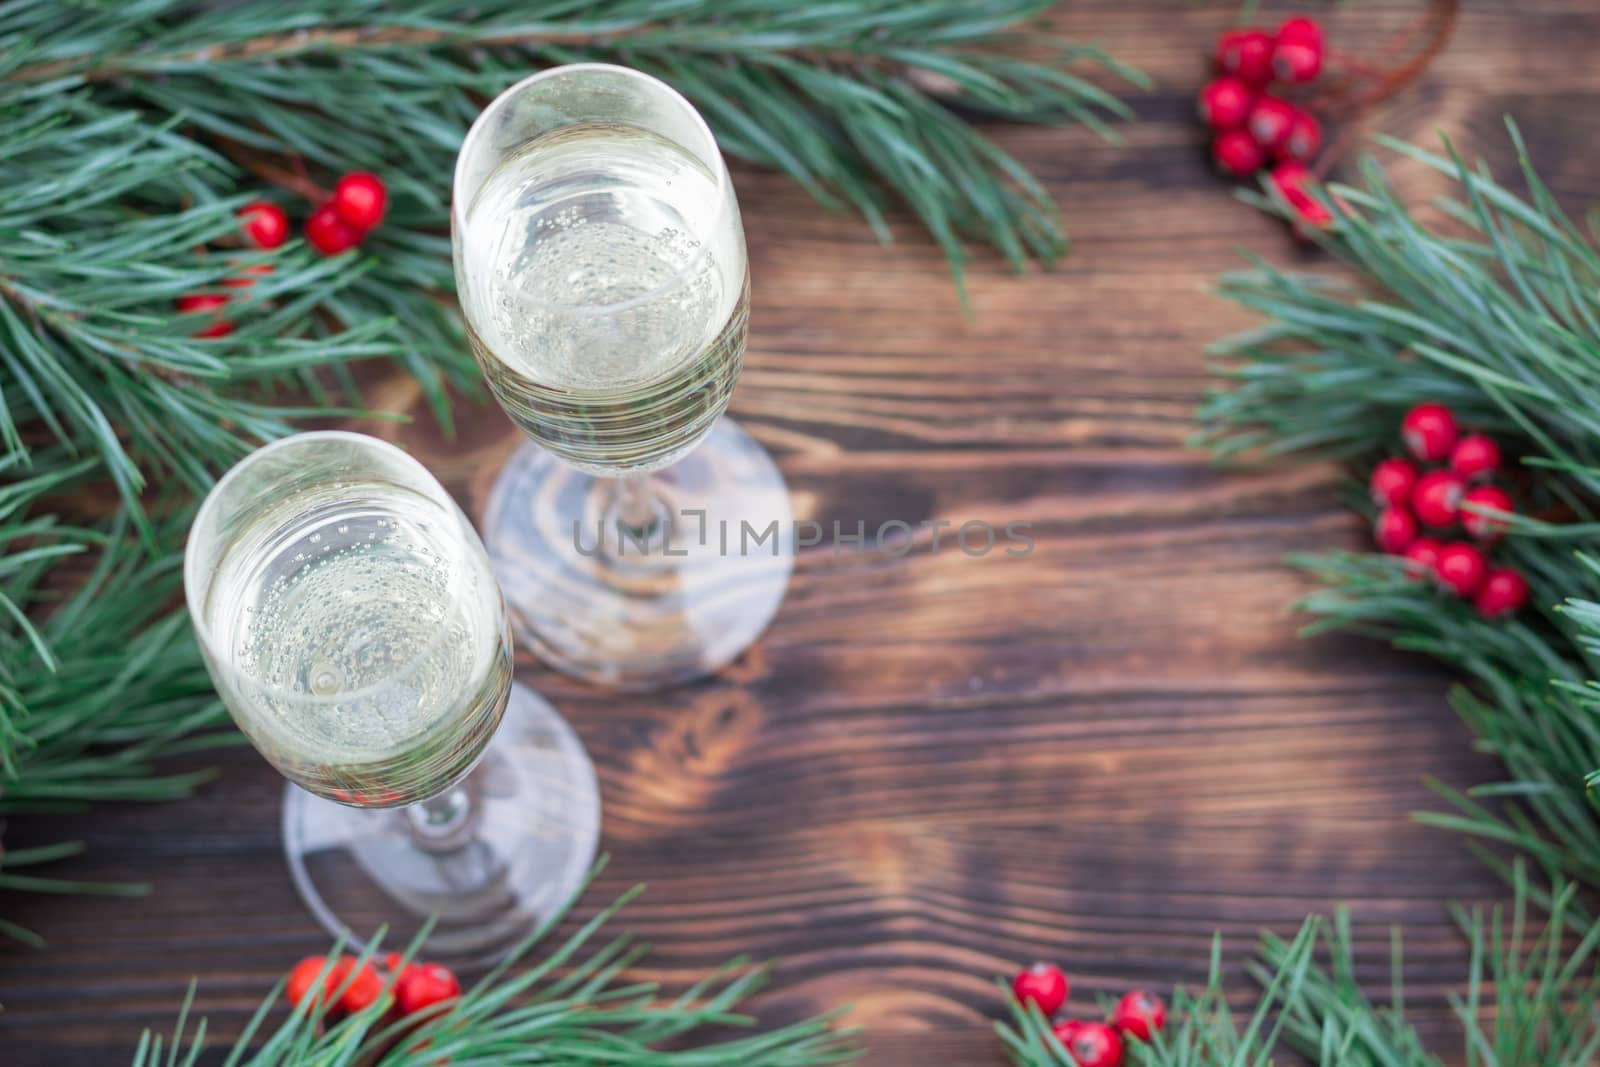 Christmas and New Year seasonal composition with pine tree branches, two glasses of champaign and red rowan berries